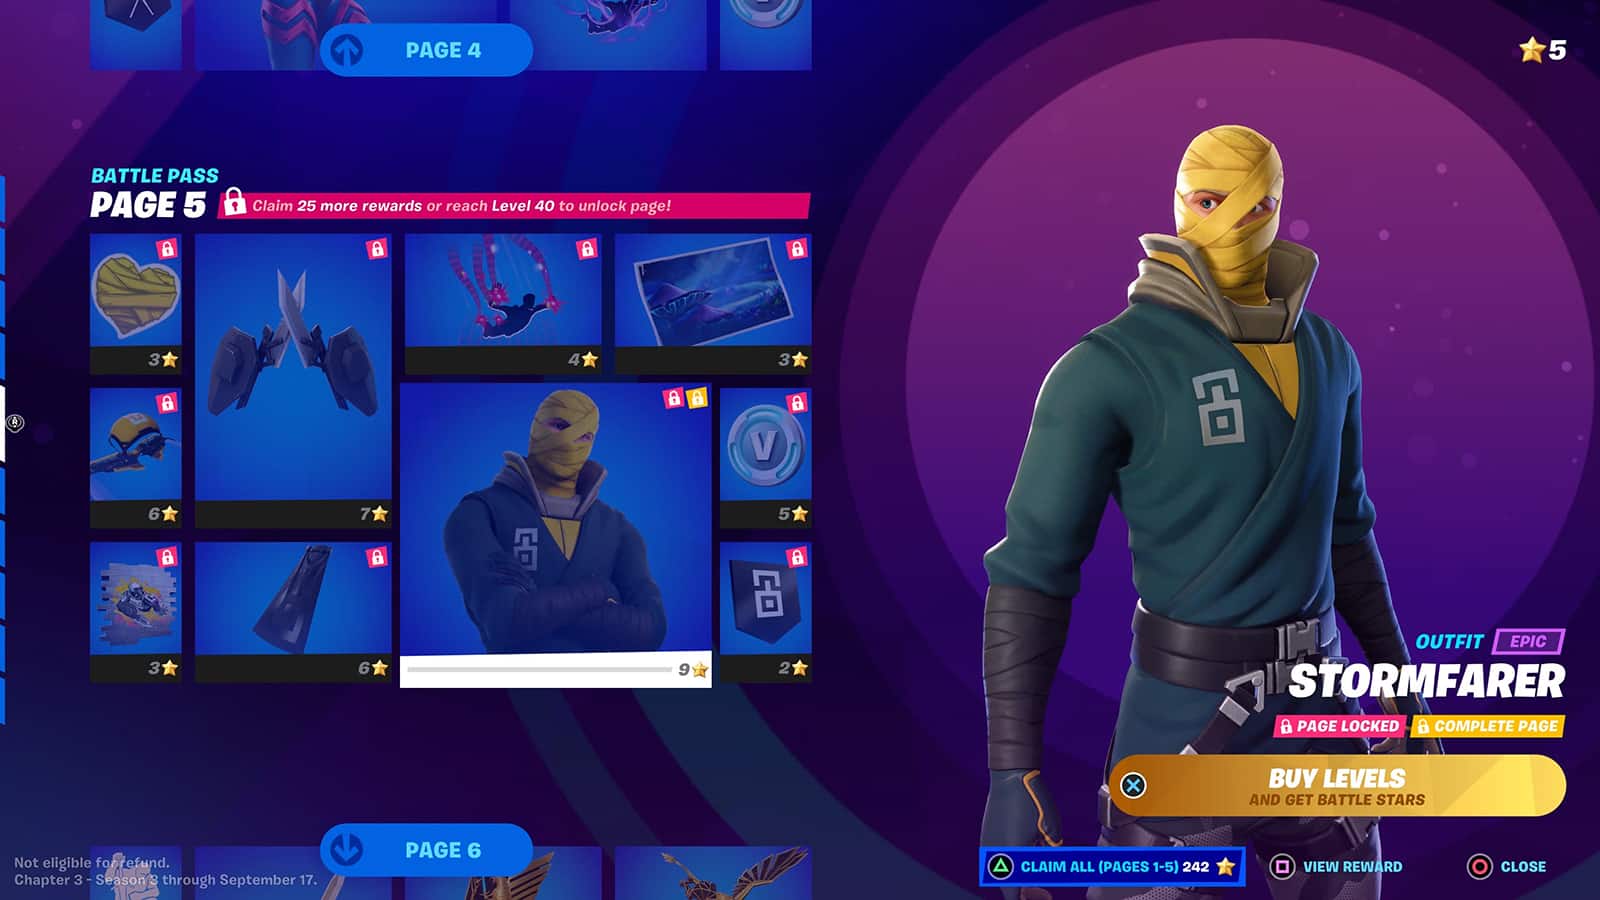 Fortnite Battle Pass page 5